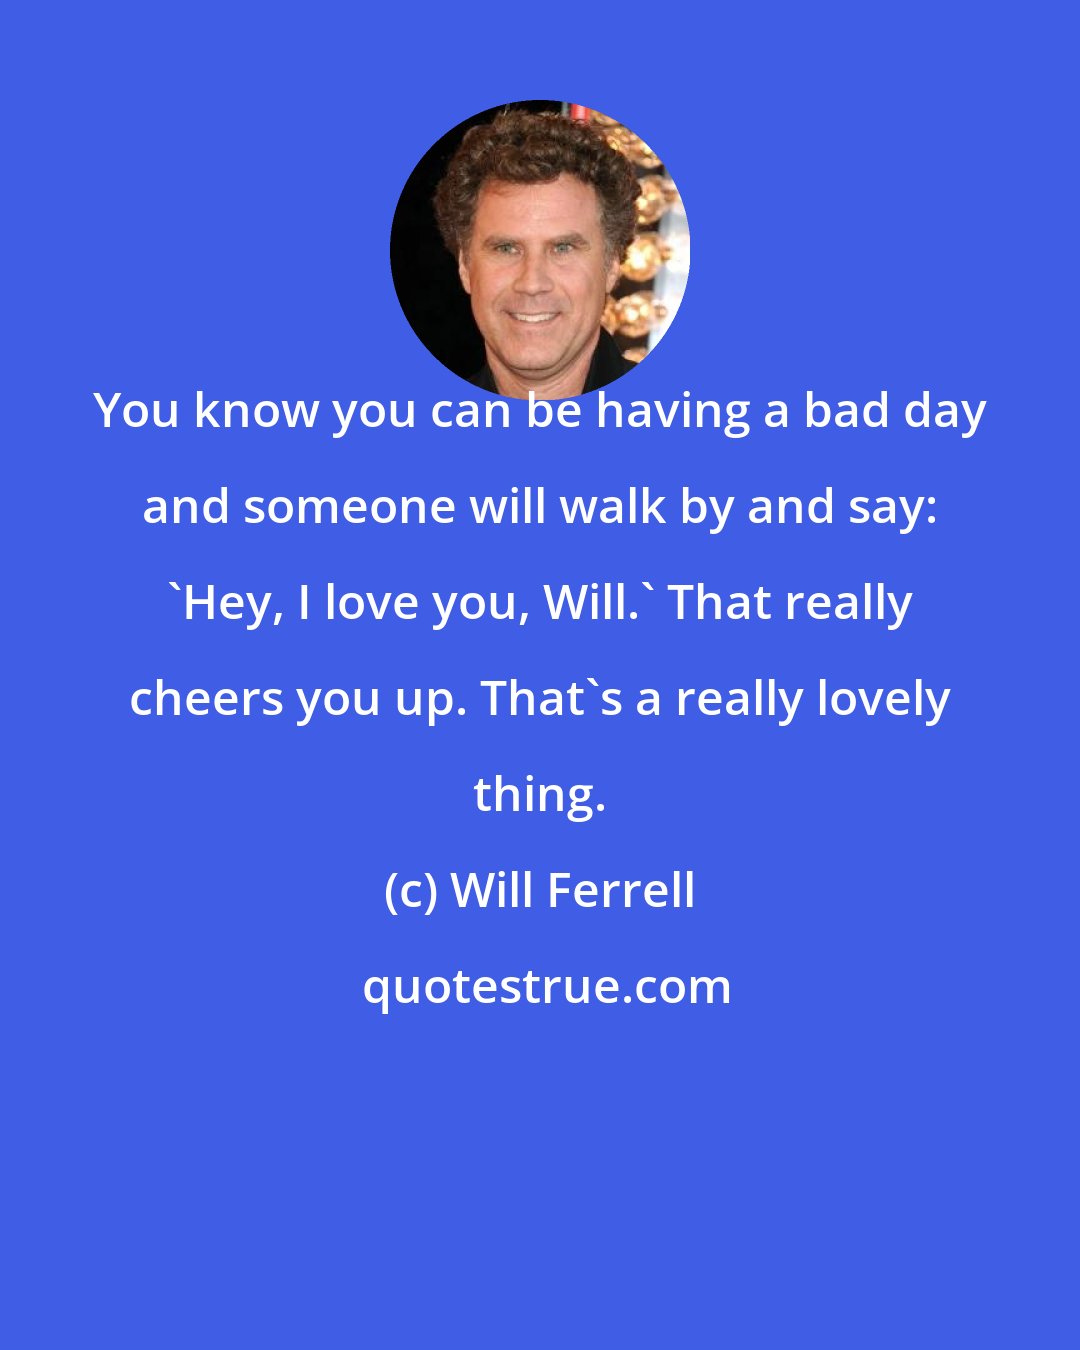 Will Ferrell: You know you can be having a bad day and someone will walk by and say: 'Hey, I love you, Will.' That really cheers you up. That's a really lovely thing.